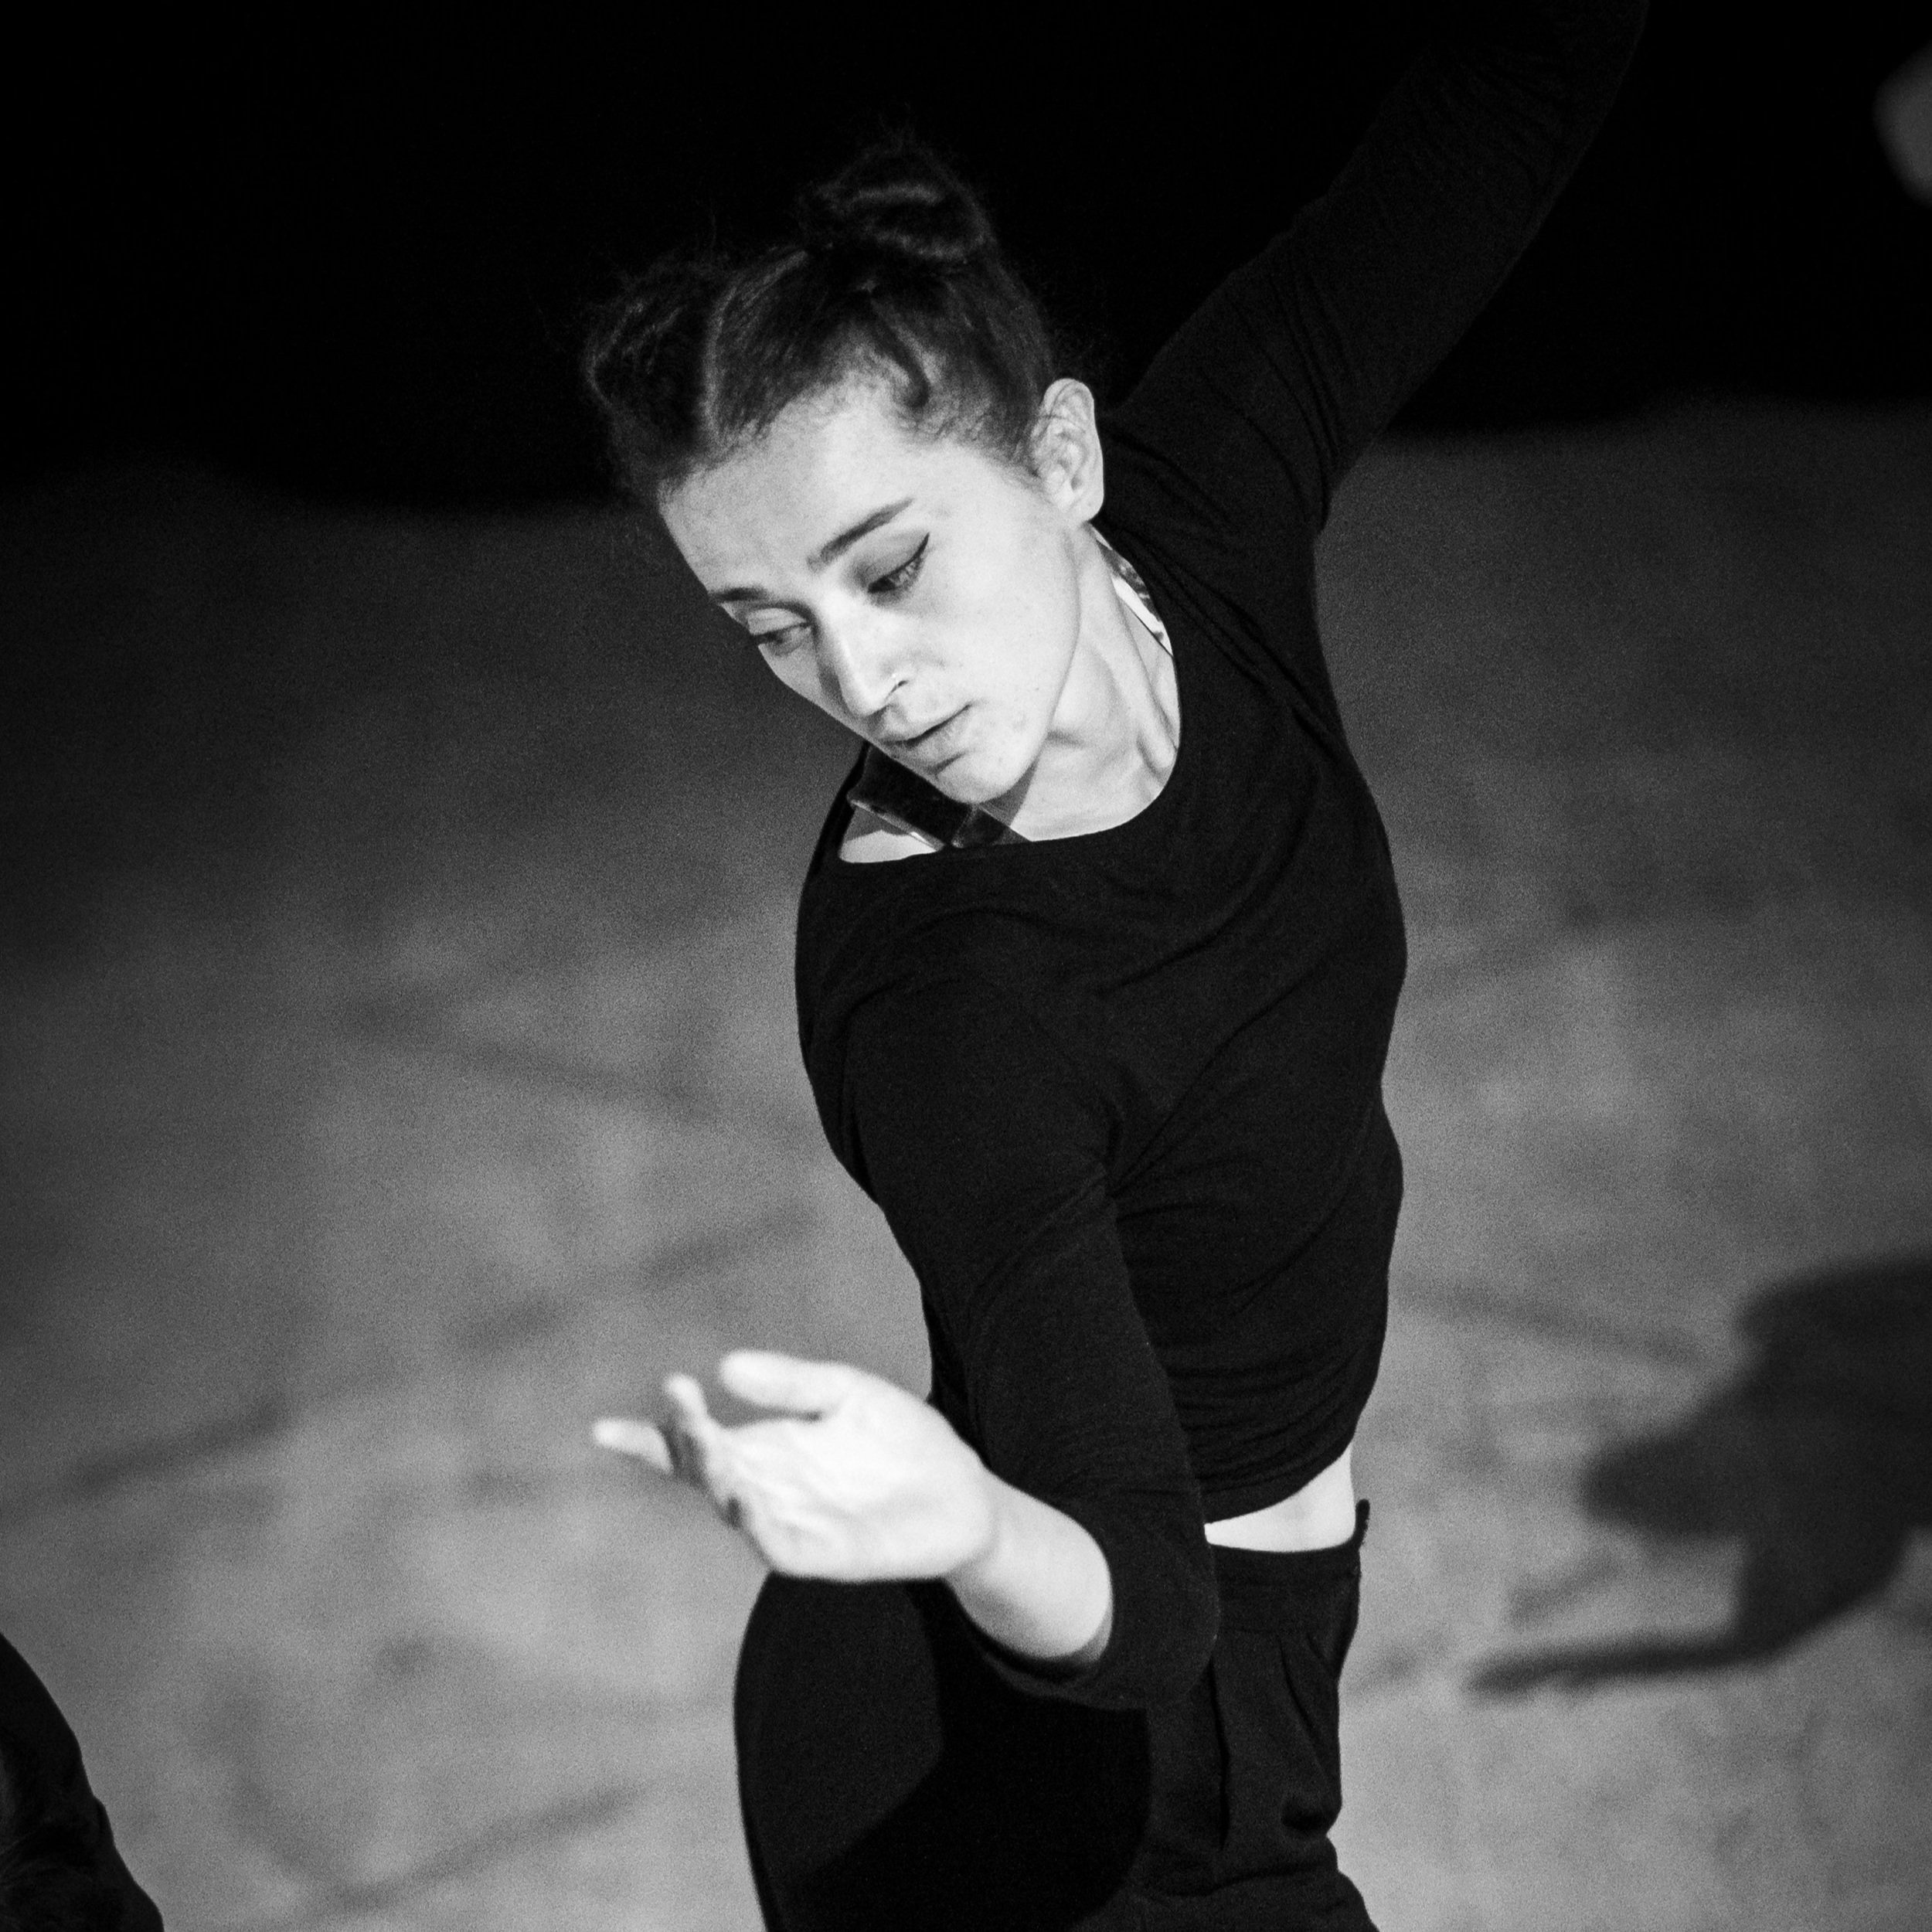  The image shows a female dancer in a studio, it looks like she is mid performance. The photo is black and white and almost is arial in it’s angle. She is wearing black clothing with dark hair tied up in two high buns. 